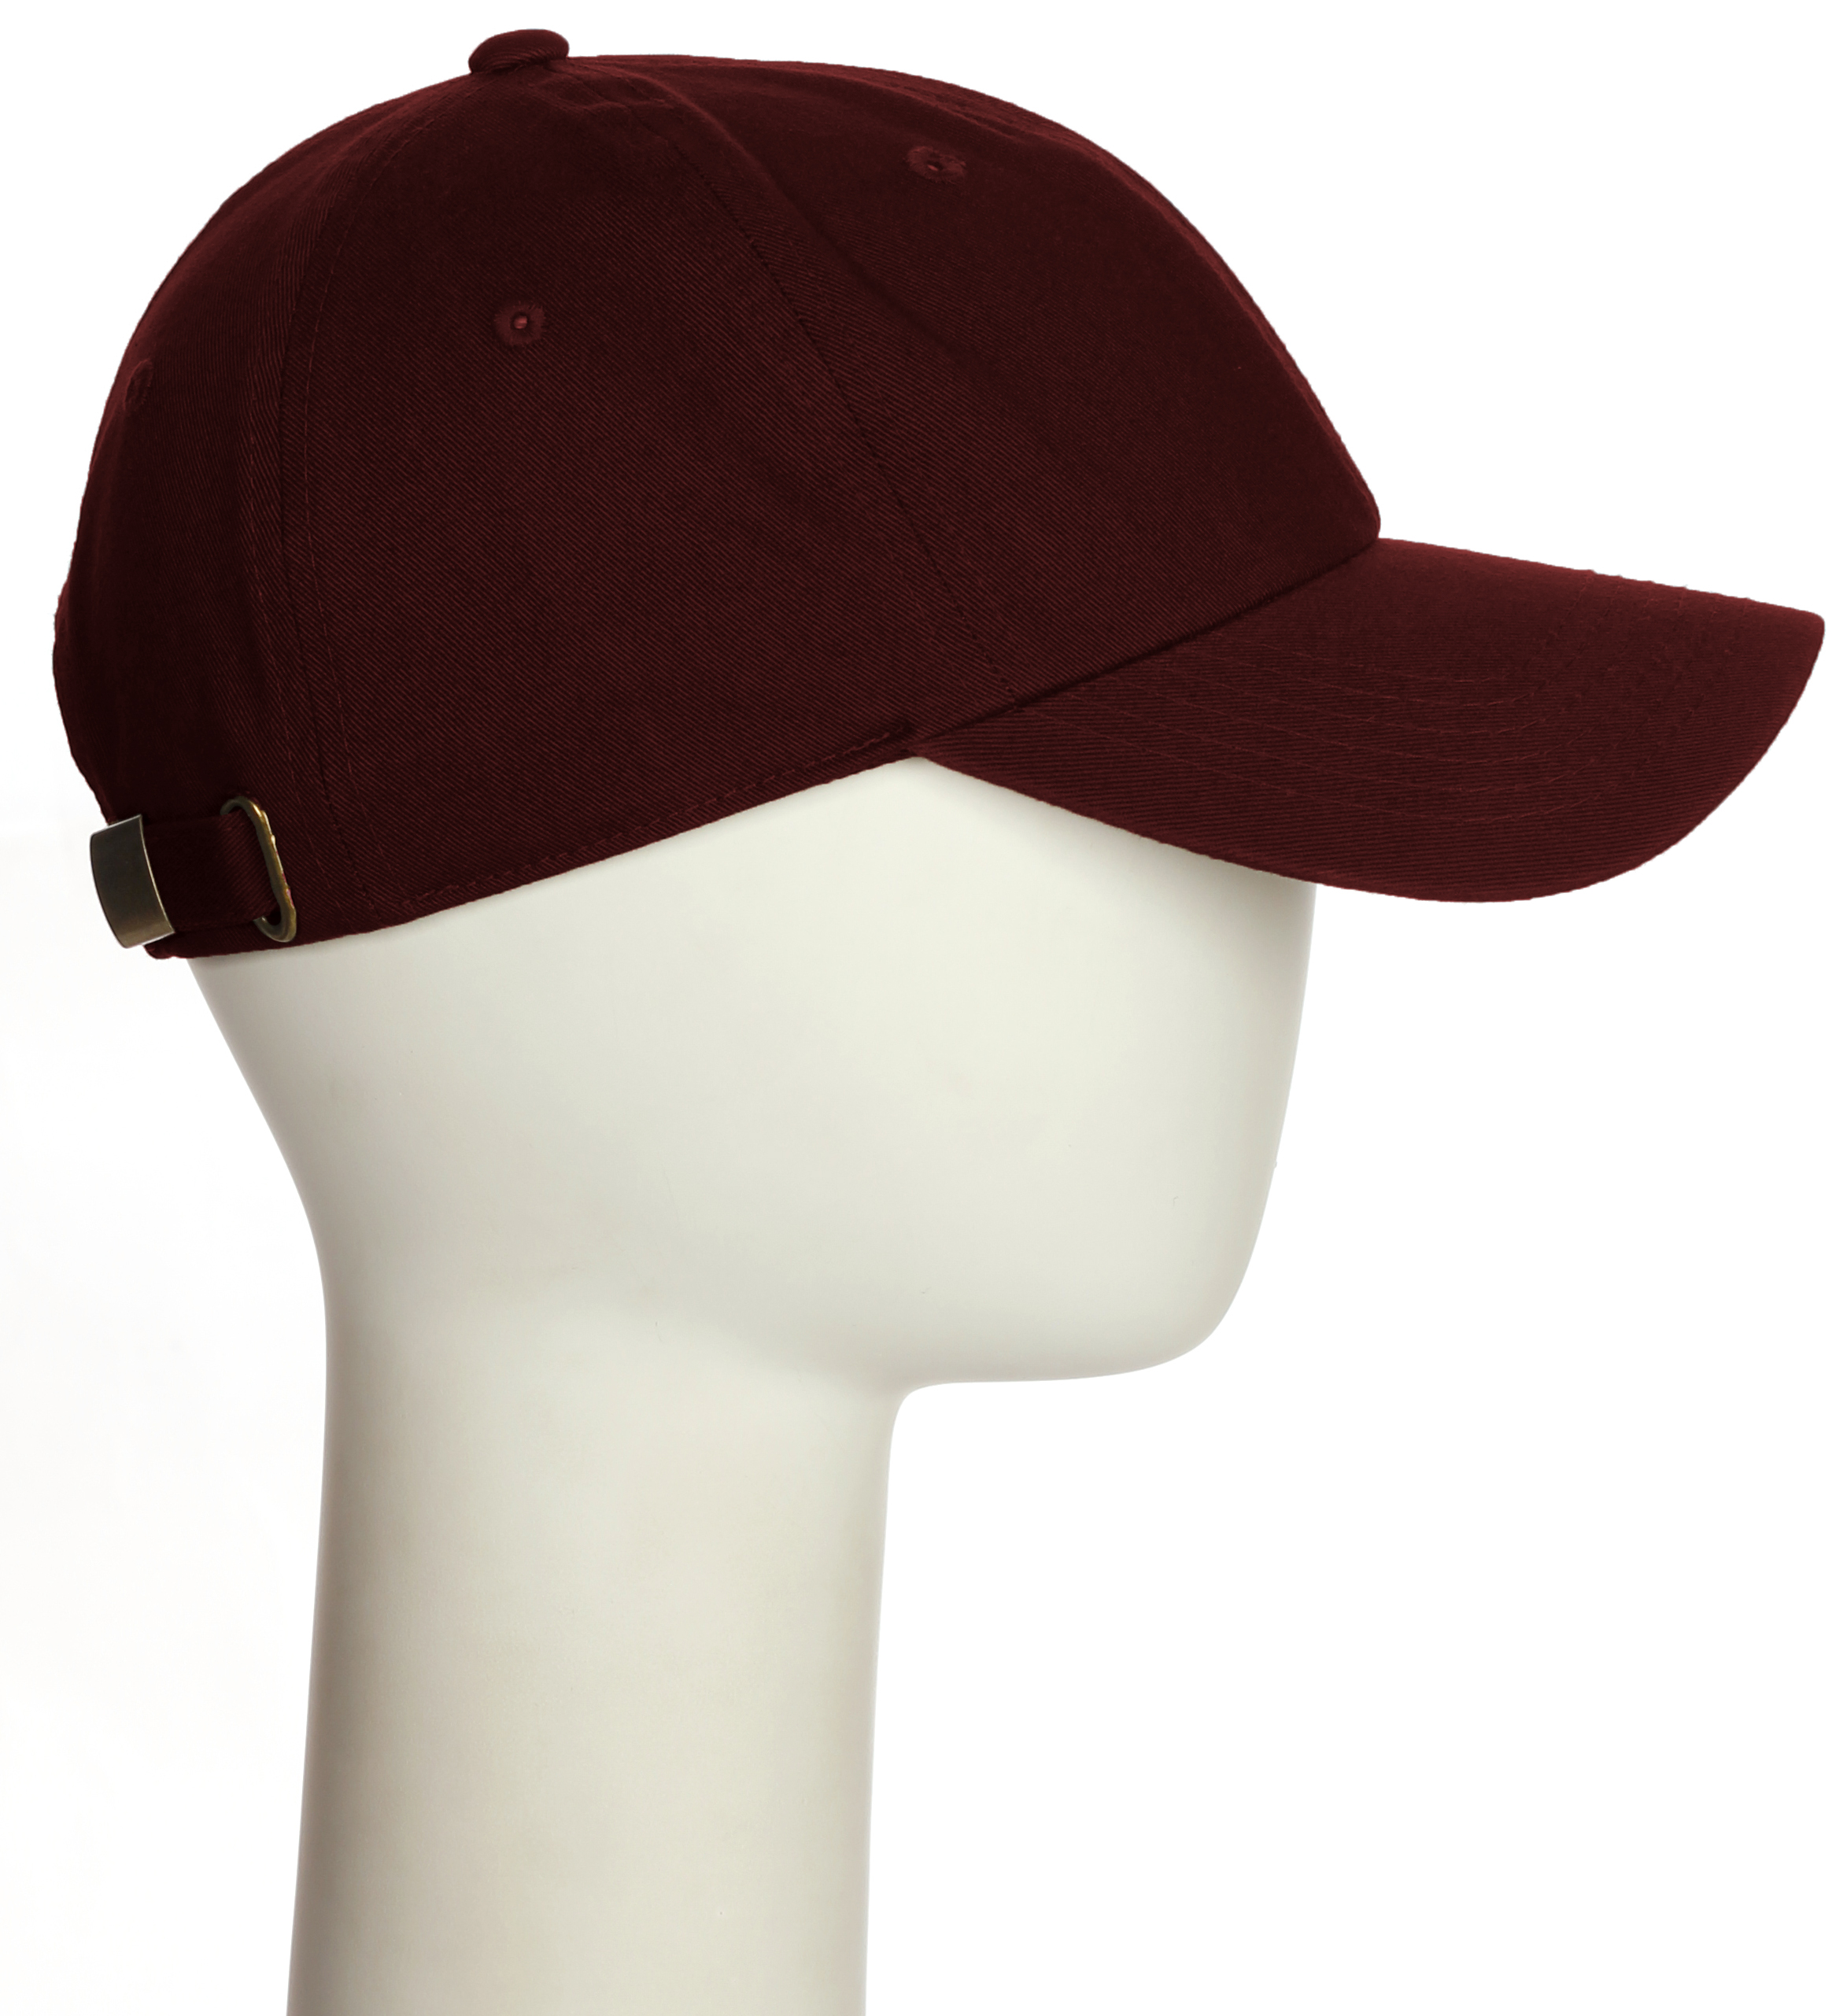 Custom Hat A to Z Initial Letters Classic Baseball Cap, Burgundy Hat White Navy Letter H - image 2 of 4